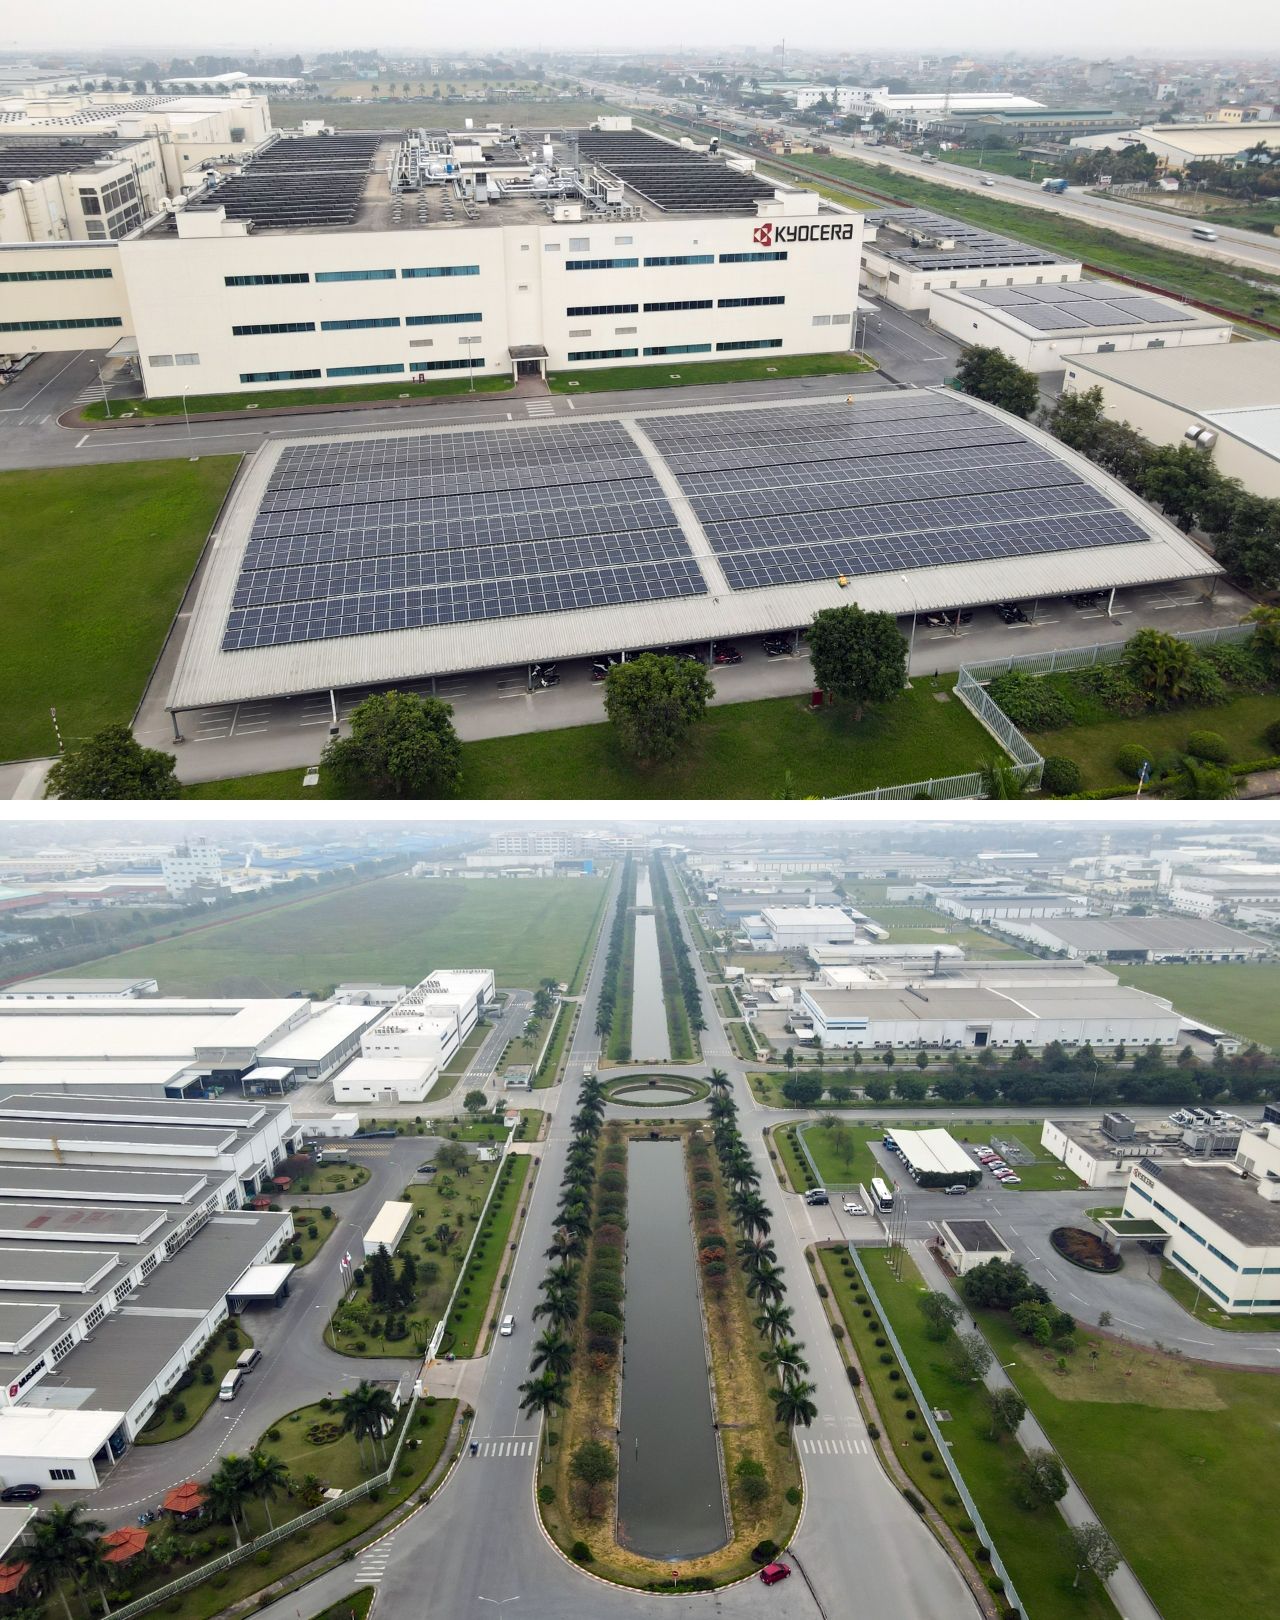 Photo of Solar panels being installed on factory roofs in TLIP to secure a stable supply of power and as an environmental measure (top). The vast site is even equipped with channels and retention basins to store rainwater for flood control (bottom). (Both photos are of TLIP II).